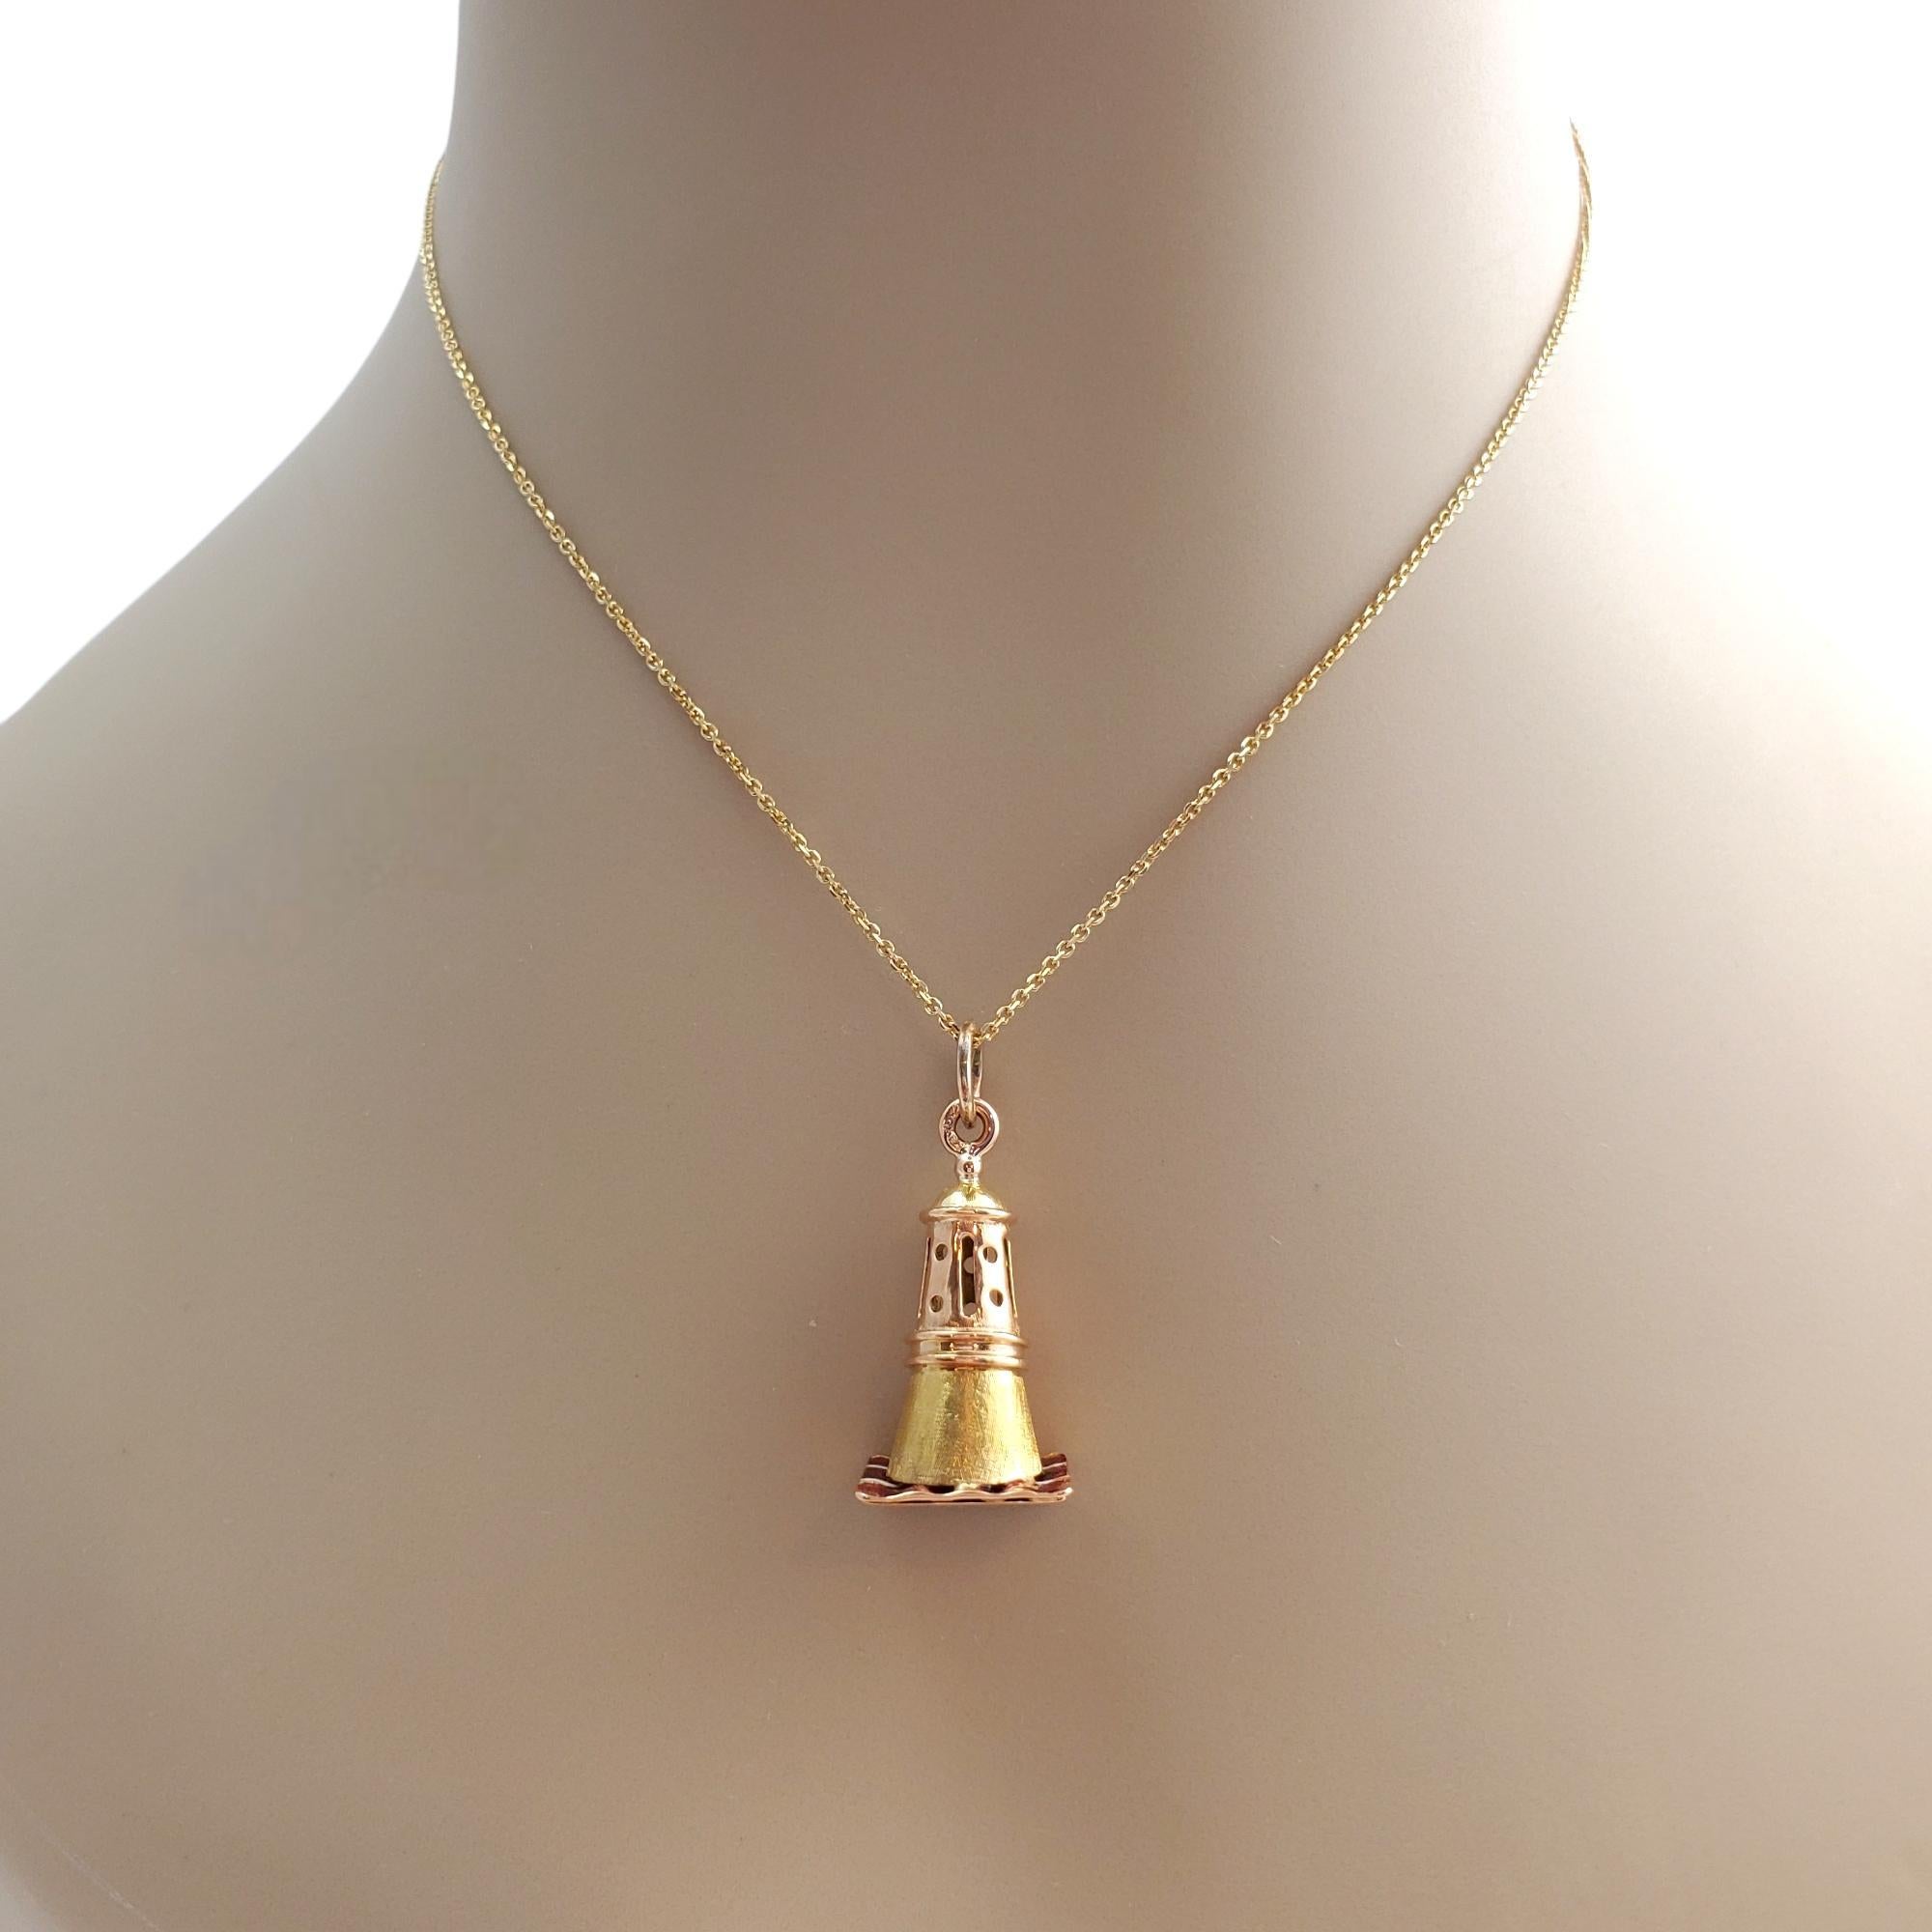 19.2K Yellow Gold Lighthouse Charm #16013 For Sale 4